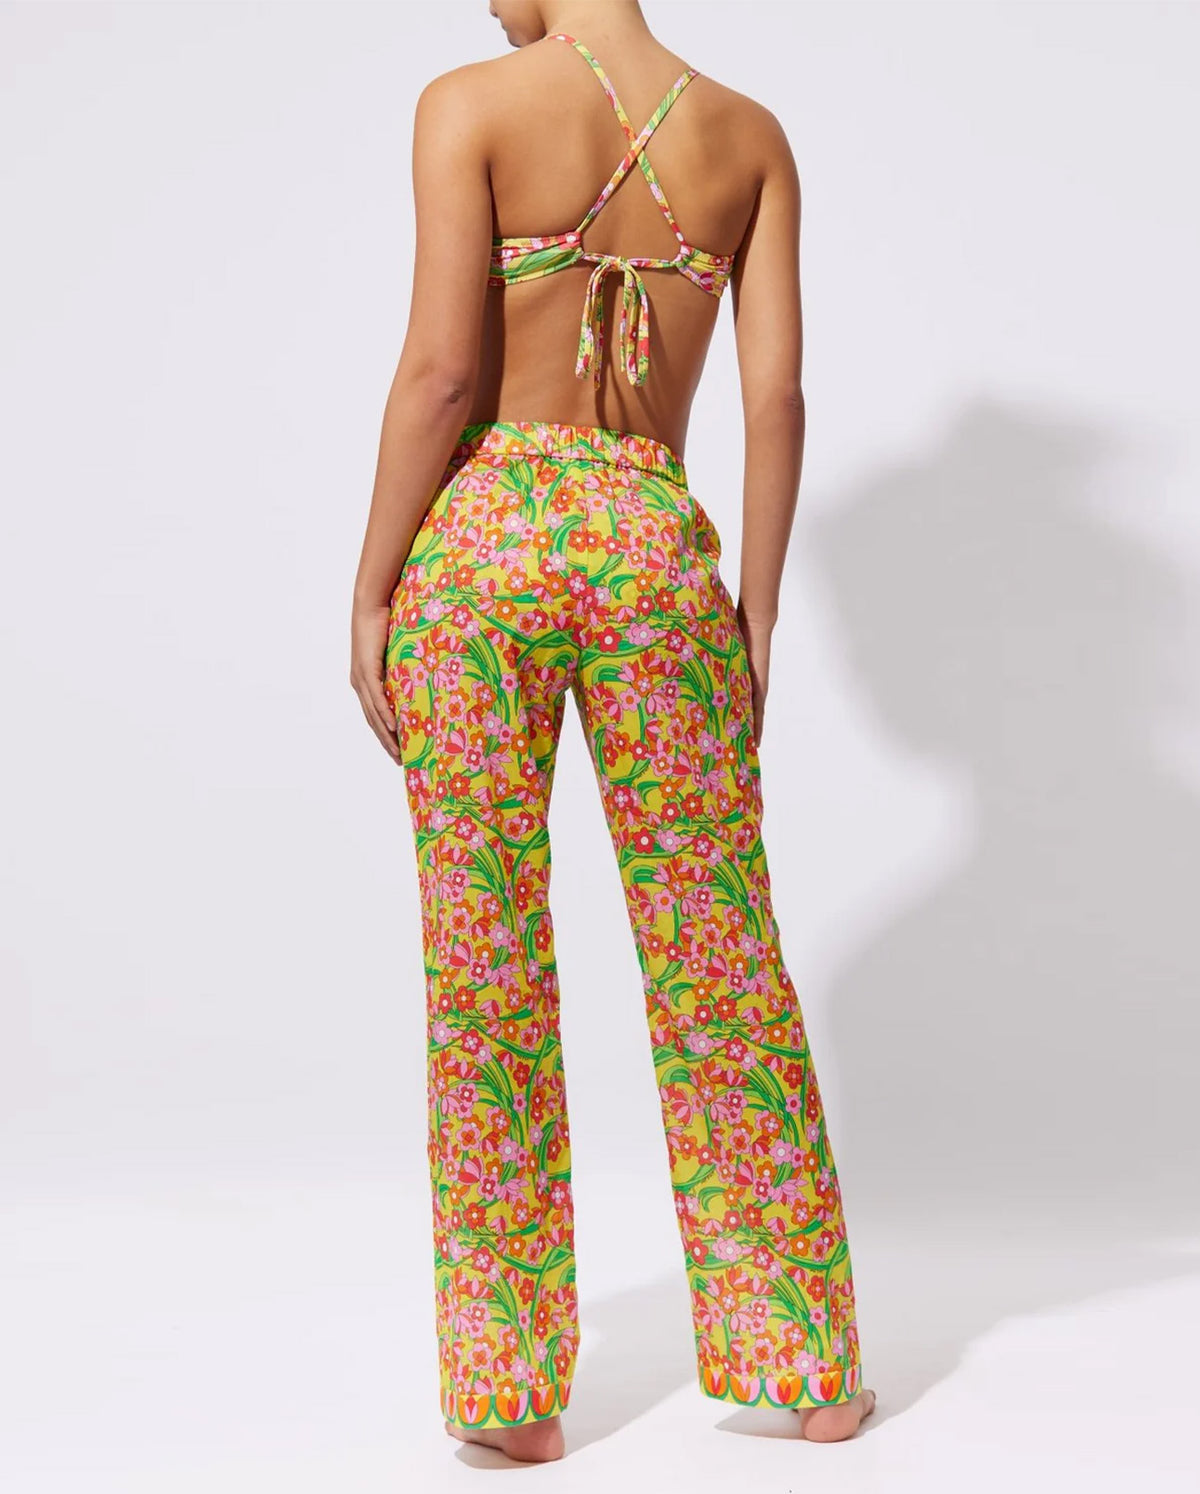 The Avril Pant - Floral Print